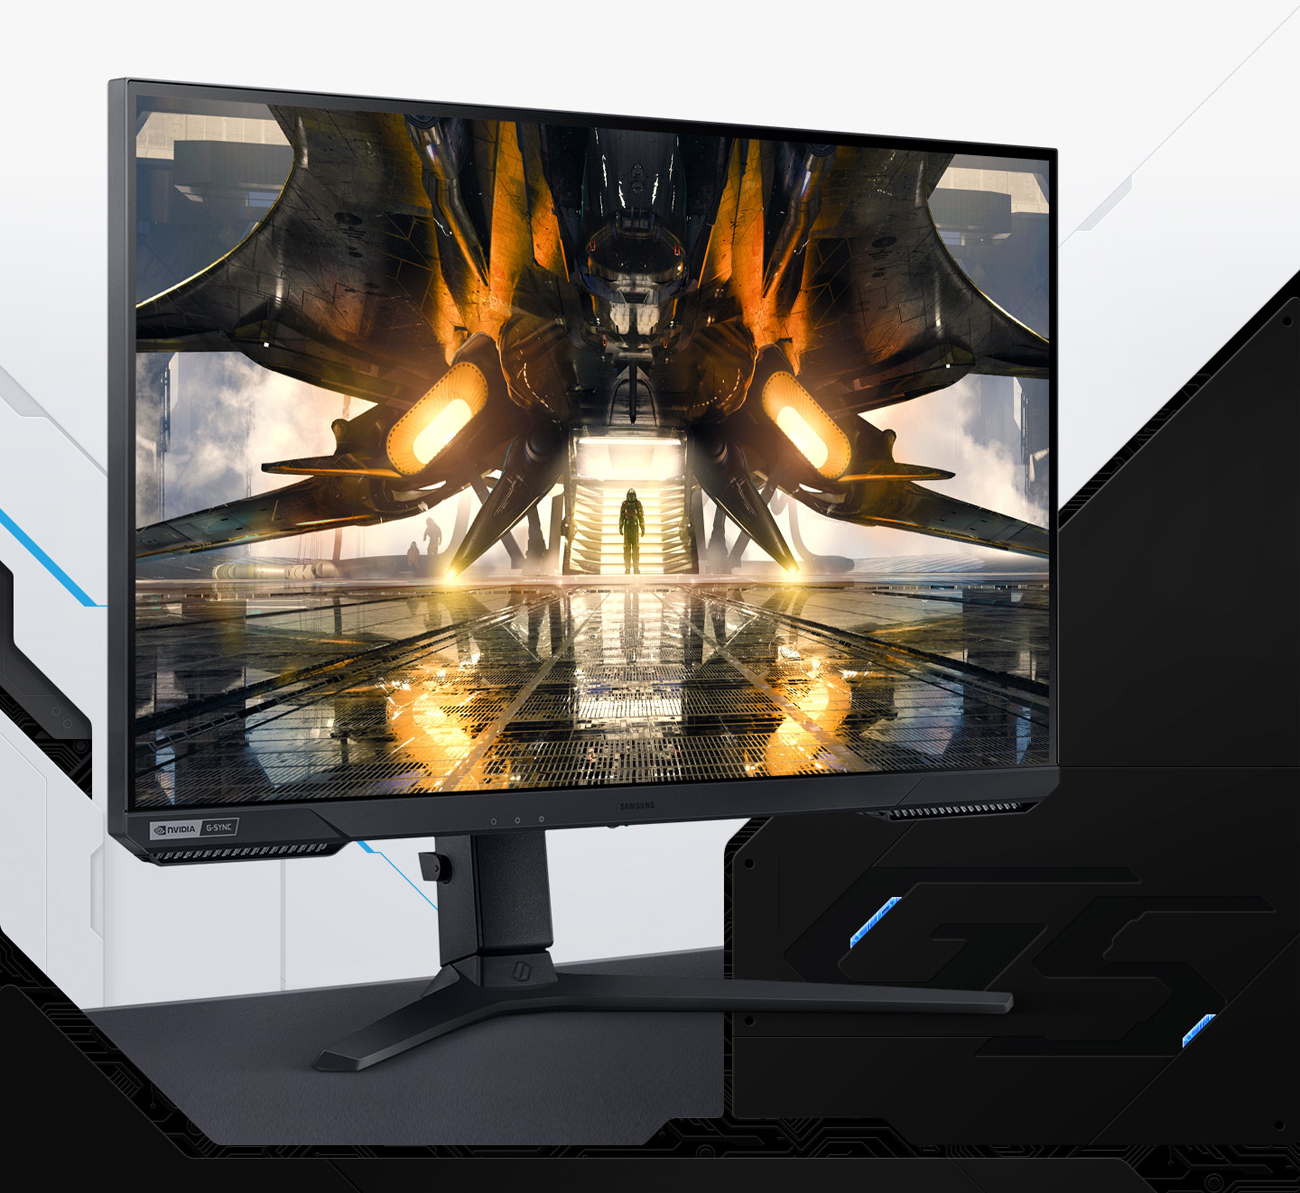 A Gaming Monitor is slightly tilted to the right.